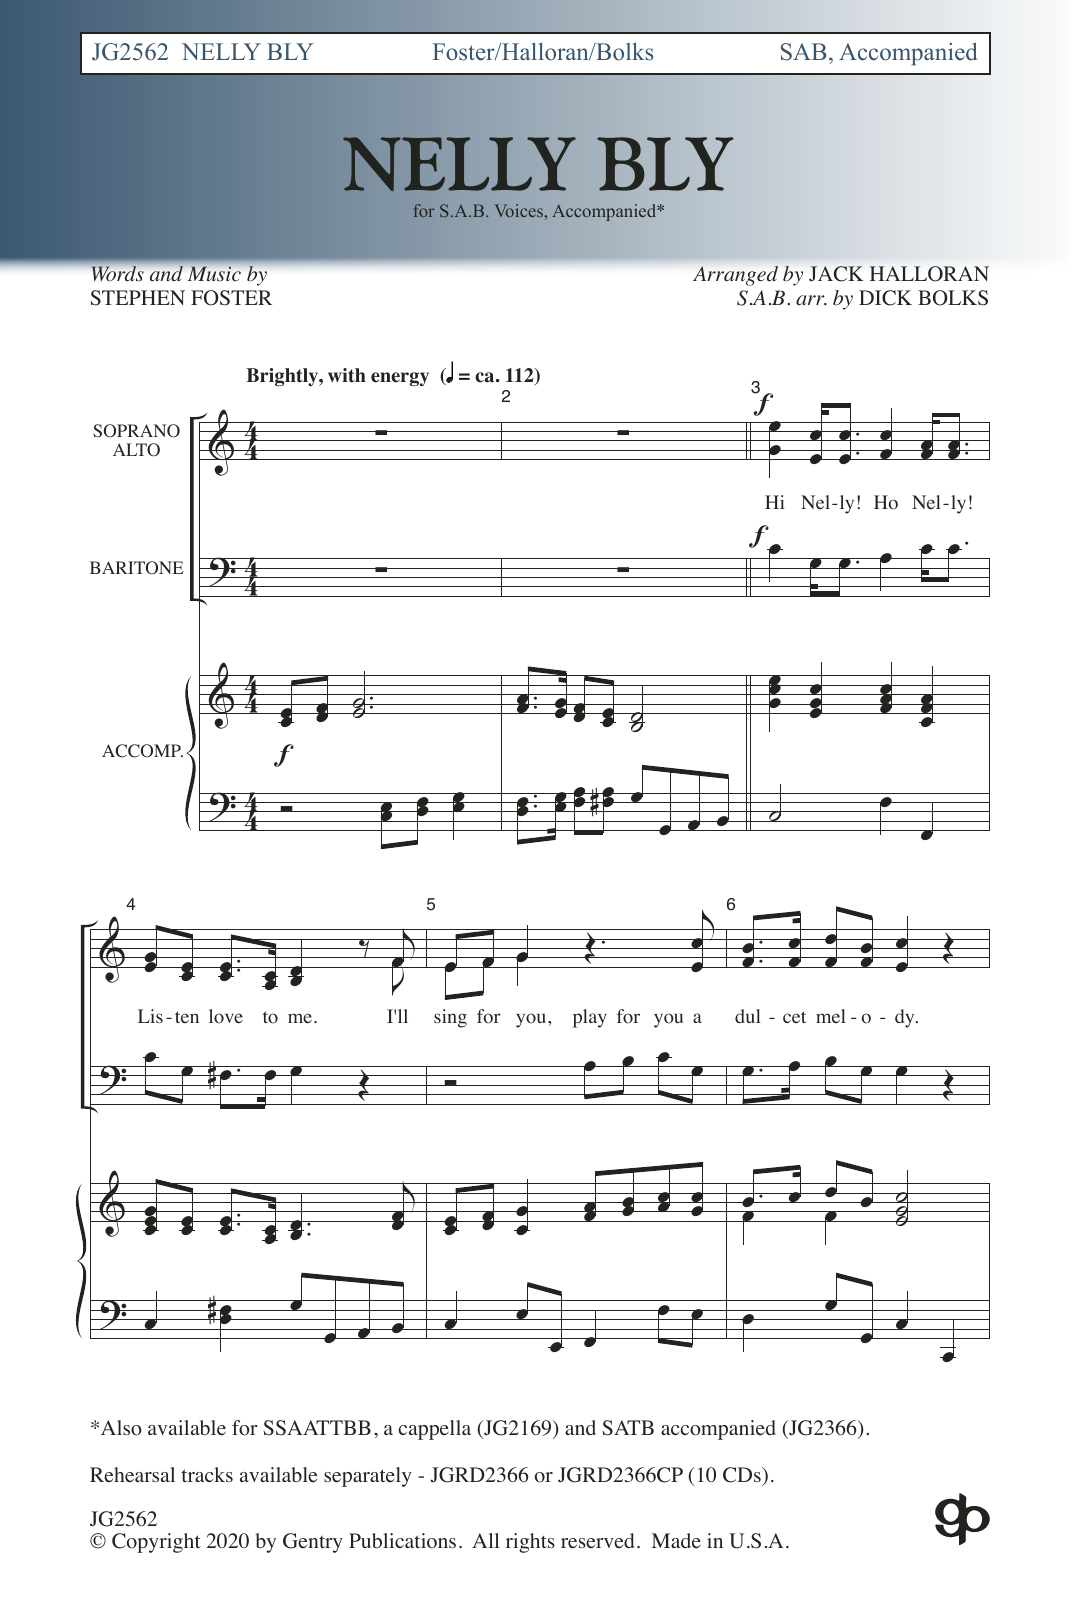 Download Jack Halloran & Dick Bolks Nelly Bly Sheet Music